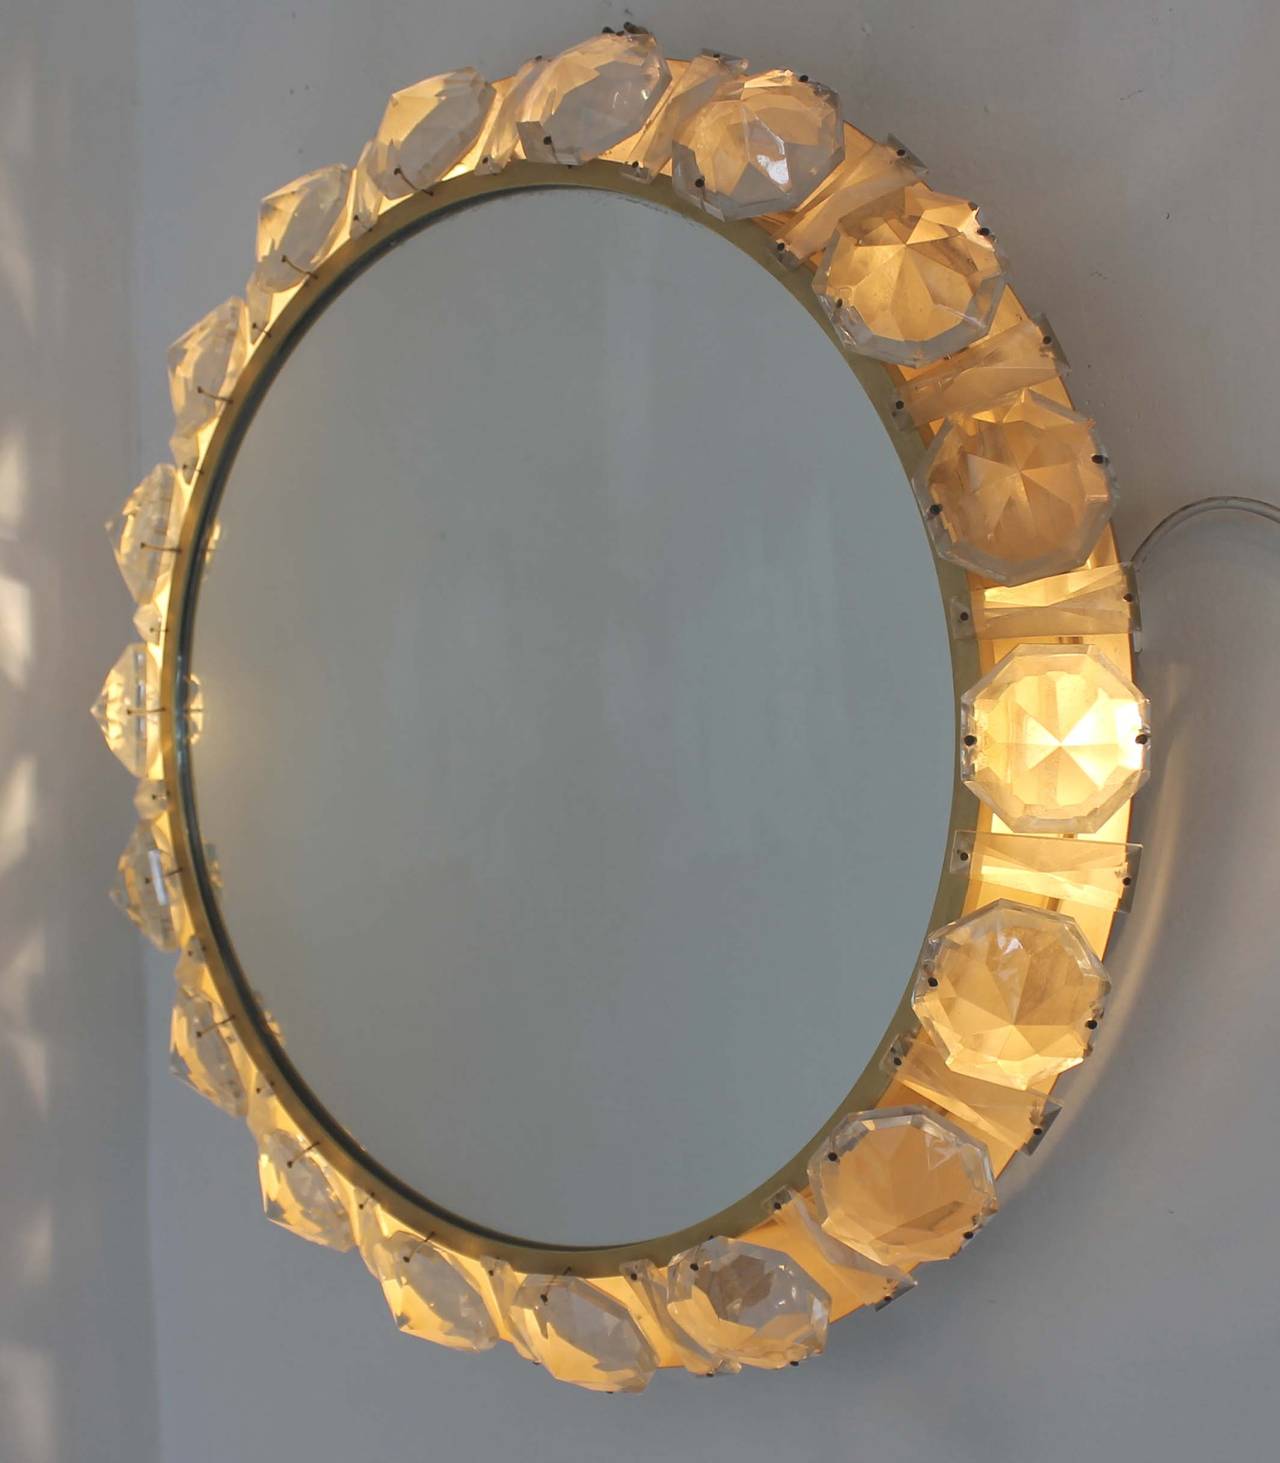 This eye-catching piece by Bakalowits & Sohne is backlit with four candelabra sockets which allow the glass diamond crusted edge to light up. The back and frame are brass. The manufacturing model is 4338.